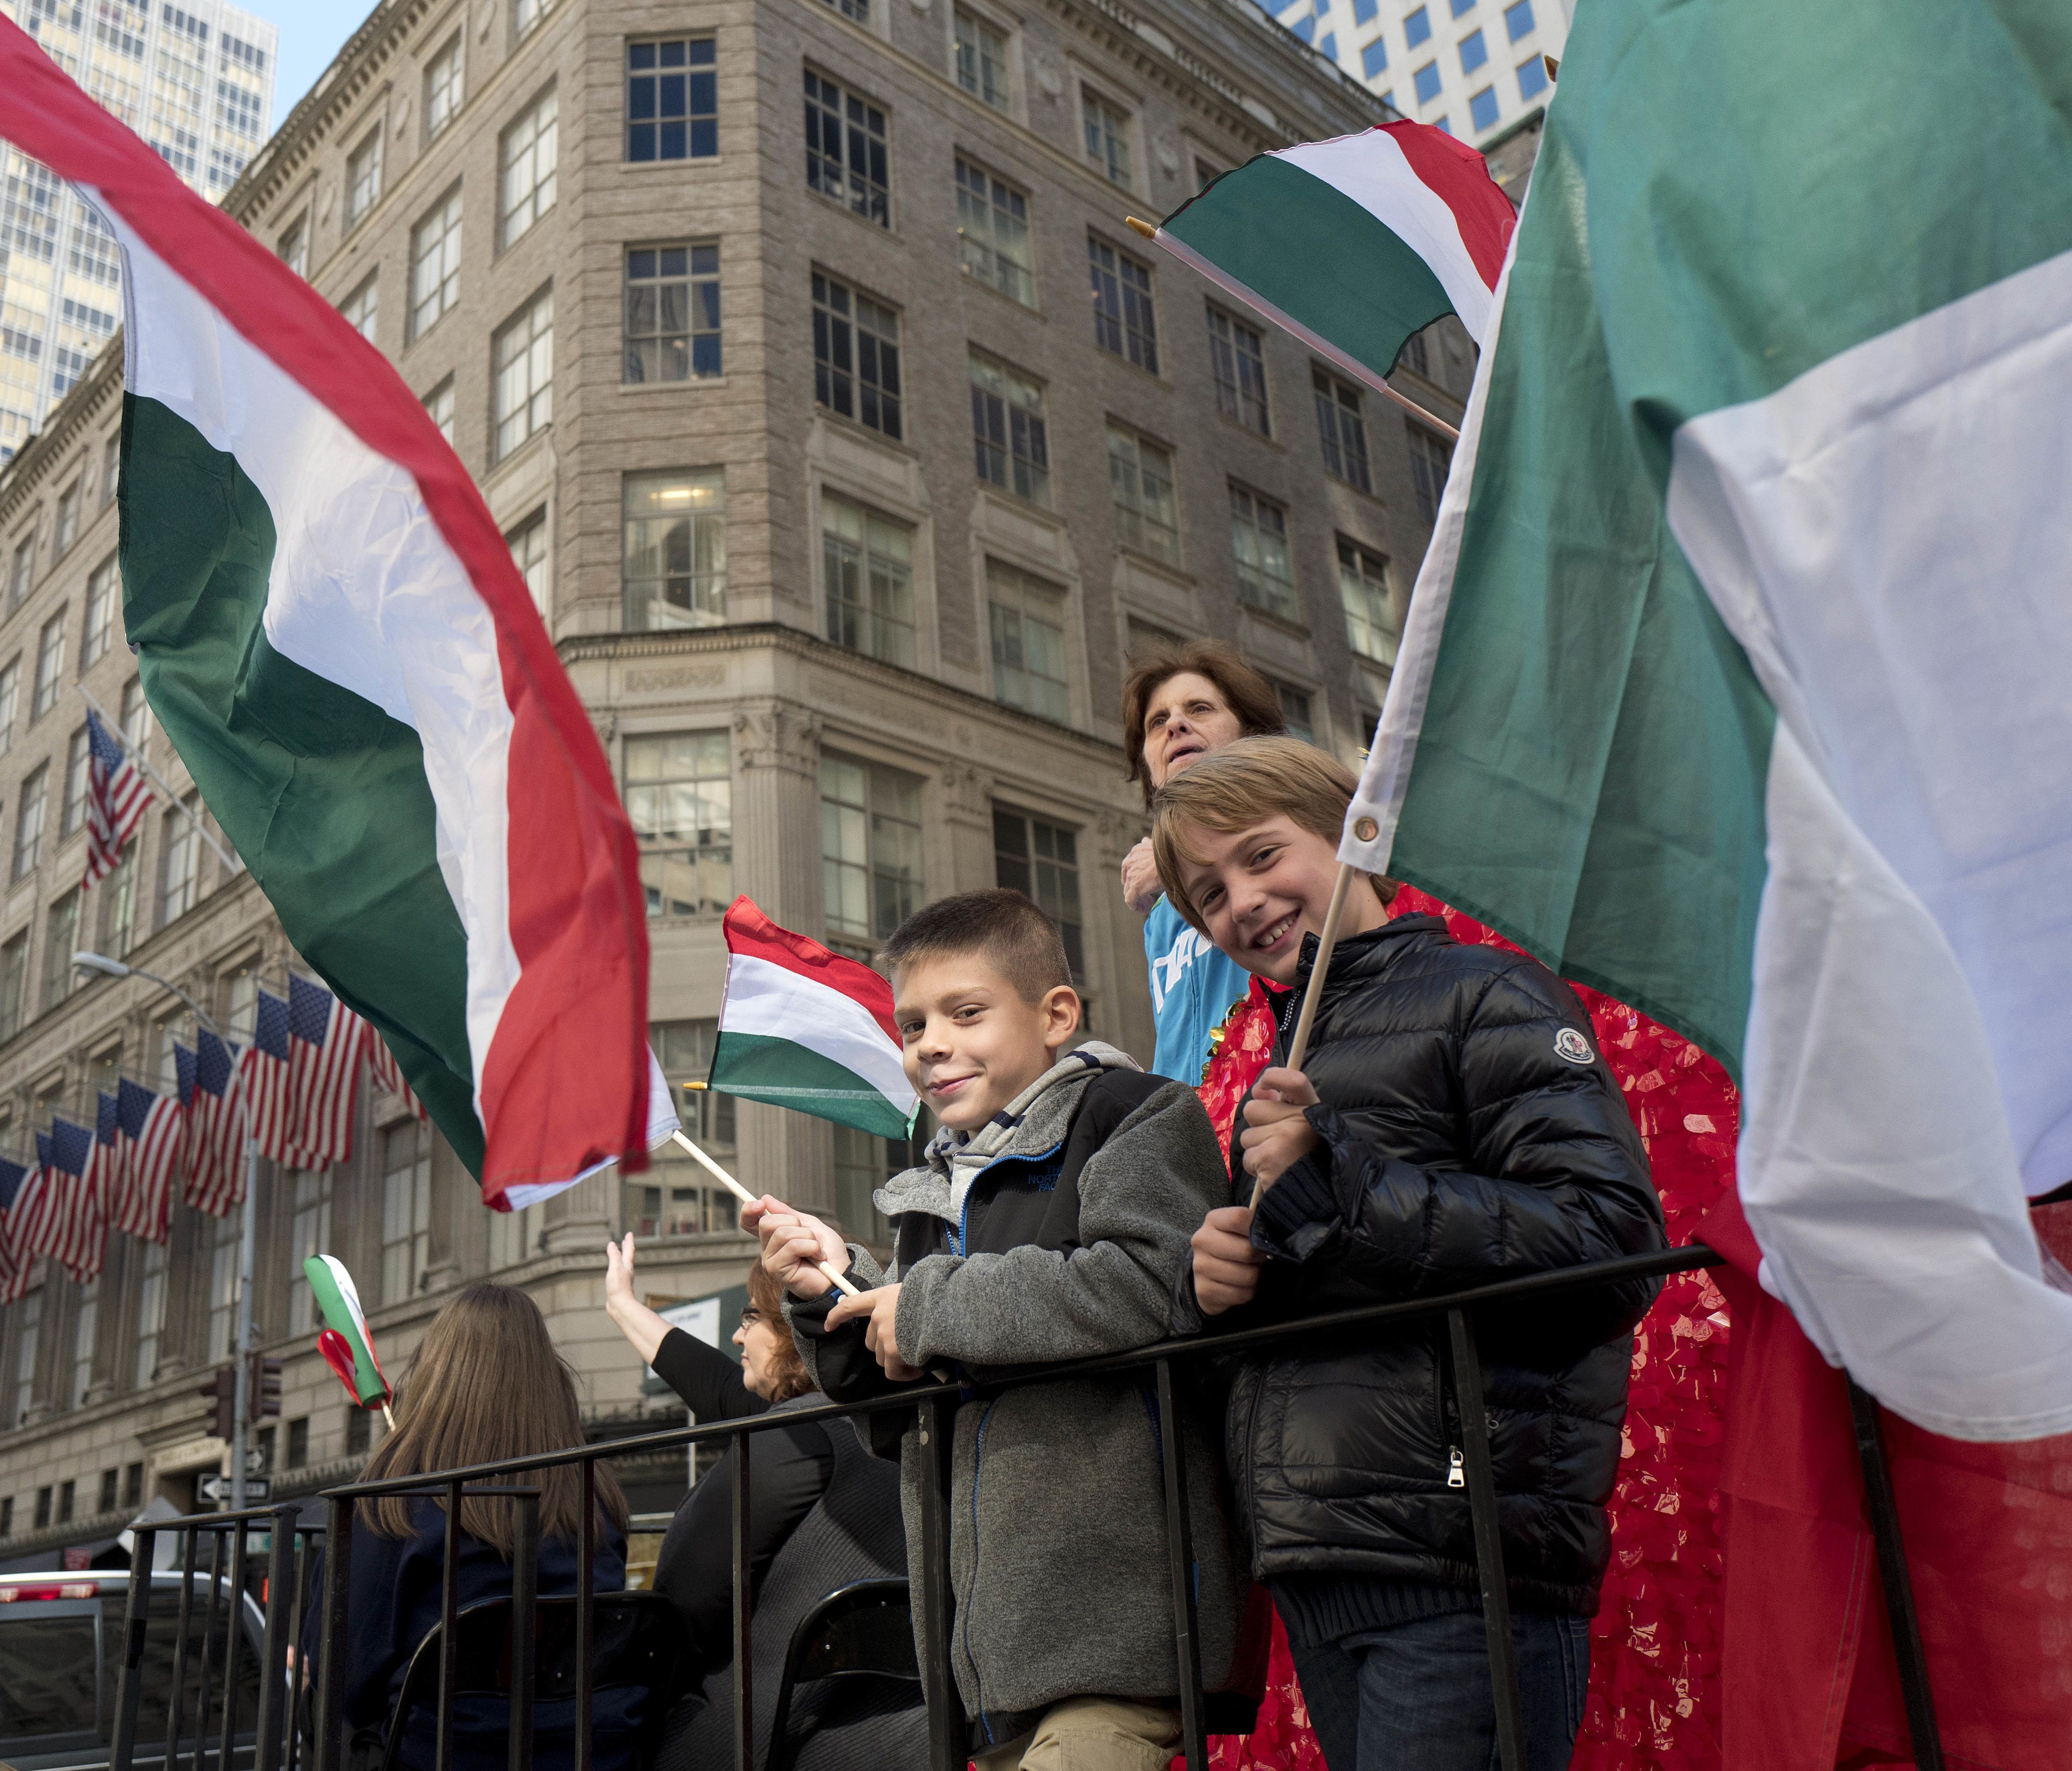 Boys wave Italian flags on Oct. 10, 2016, while riding a float in the Columbus Day Parade in New York.